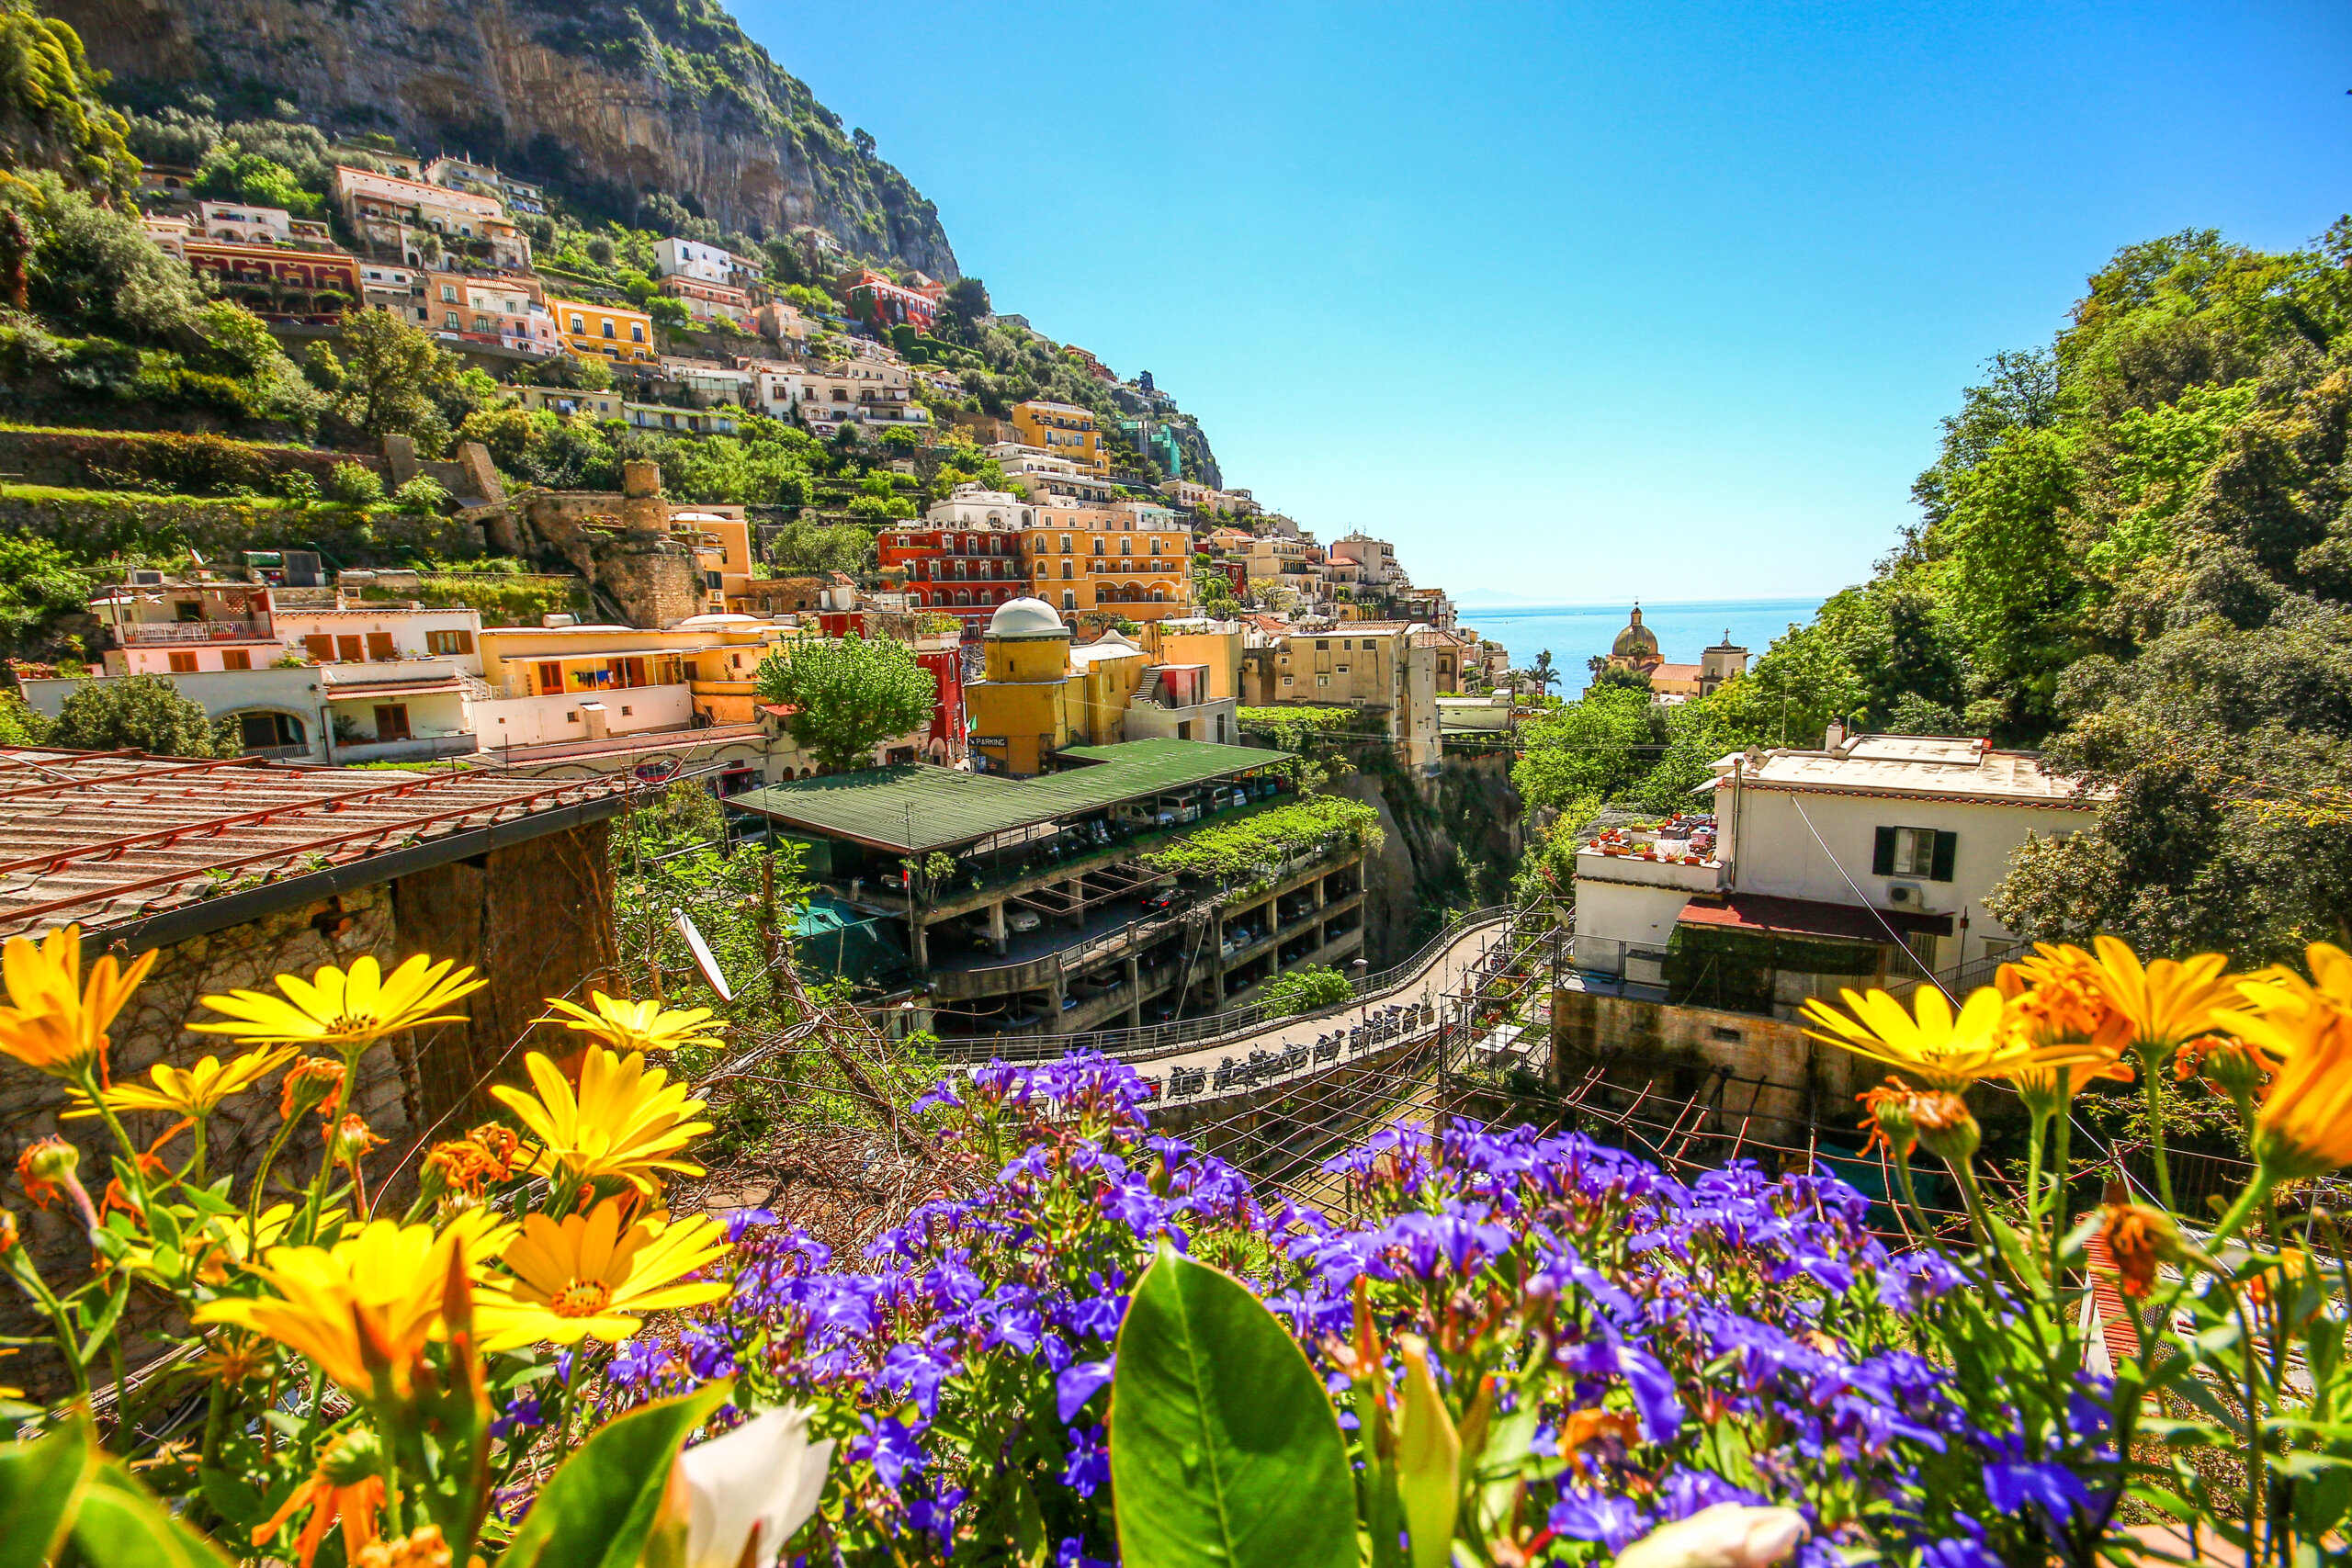 Flowers in the foregrand with villas on a hillside in the Amalfi Coast looking out on the ocean.